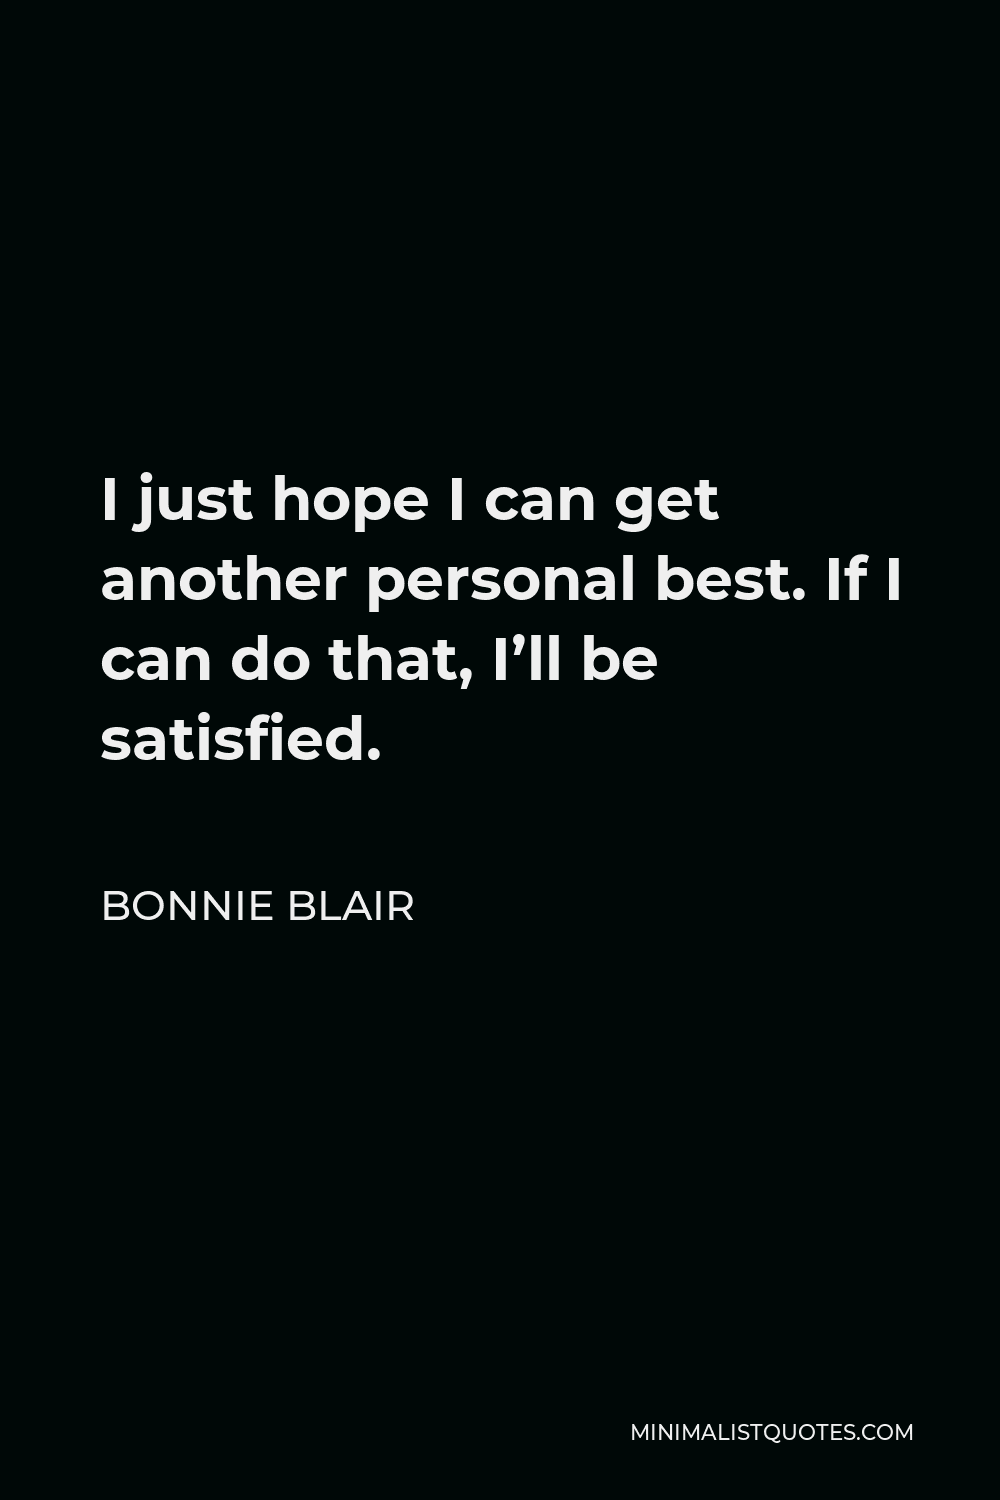 Bonnie Blair Quote - I just hope I can get another personal best. If I can do that, I’ll be satisfied.